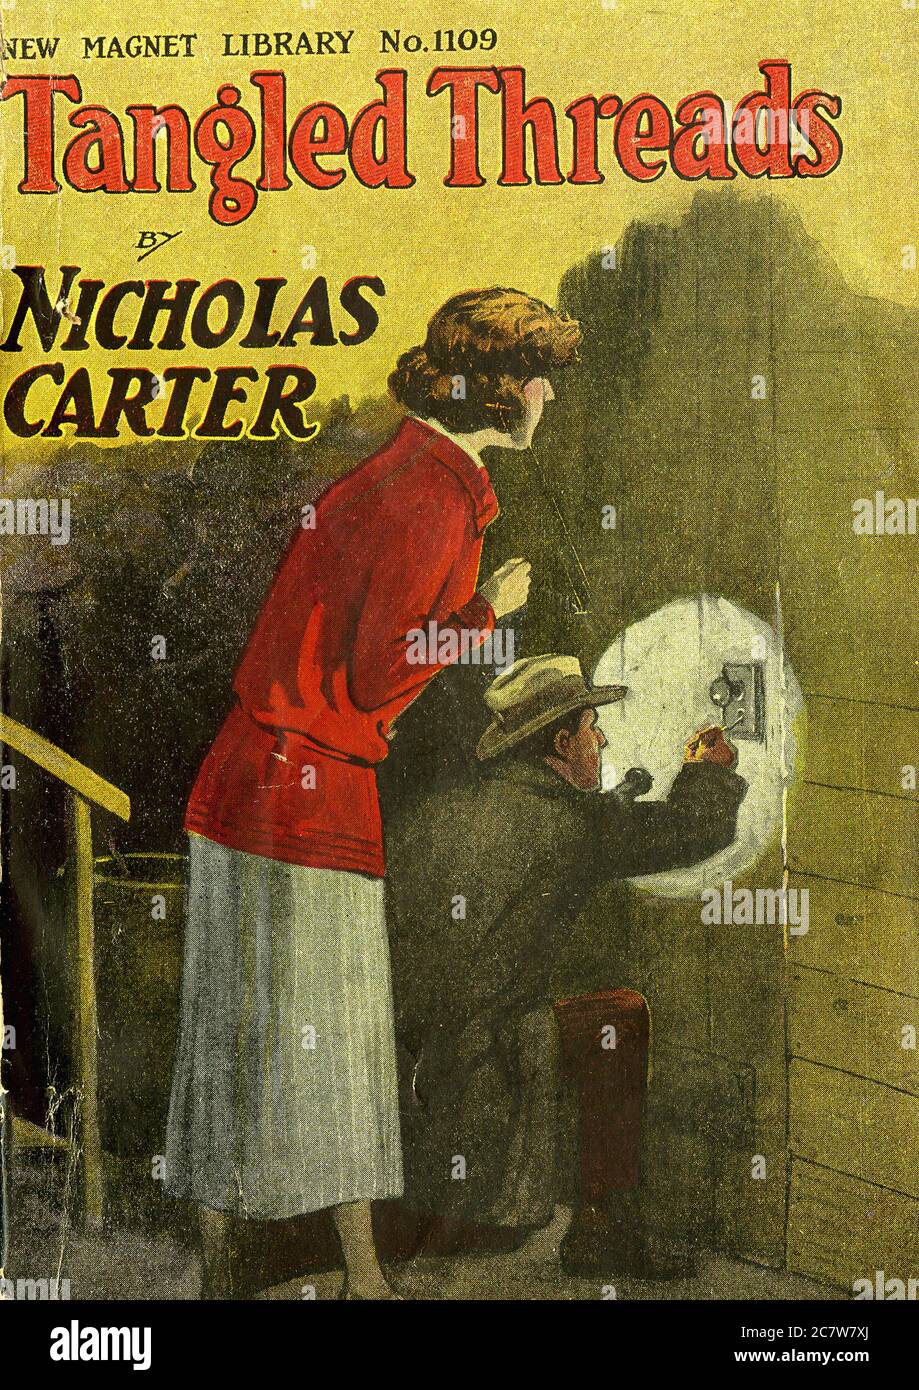 Nicholas Carter - Tangled Threads - New Magnet Library - Vintage Pulp Literary Stock Photo